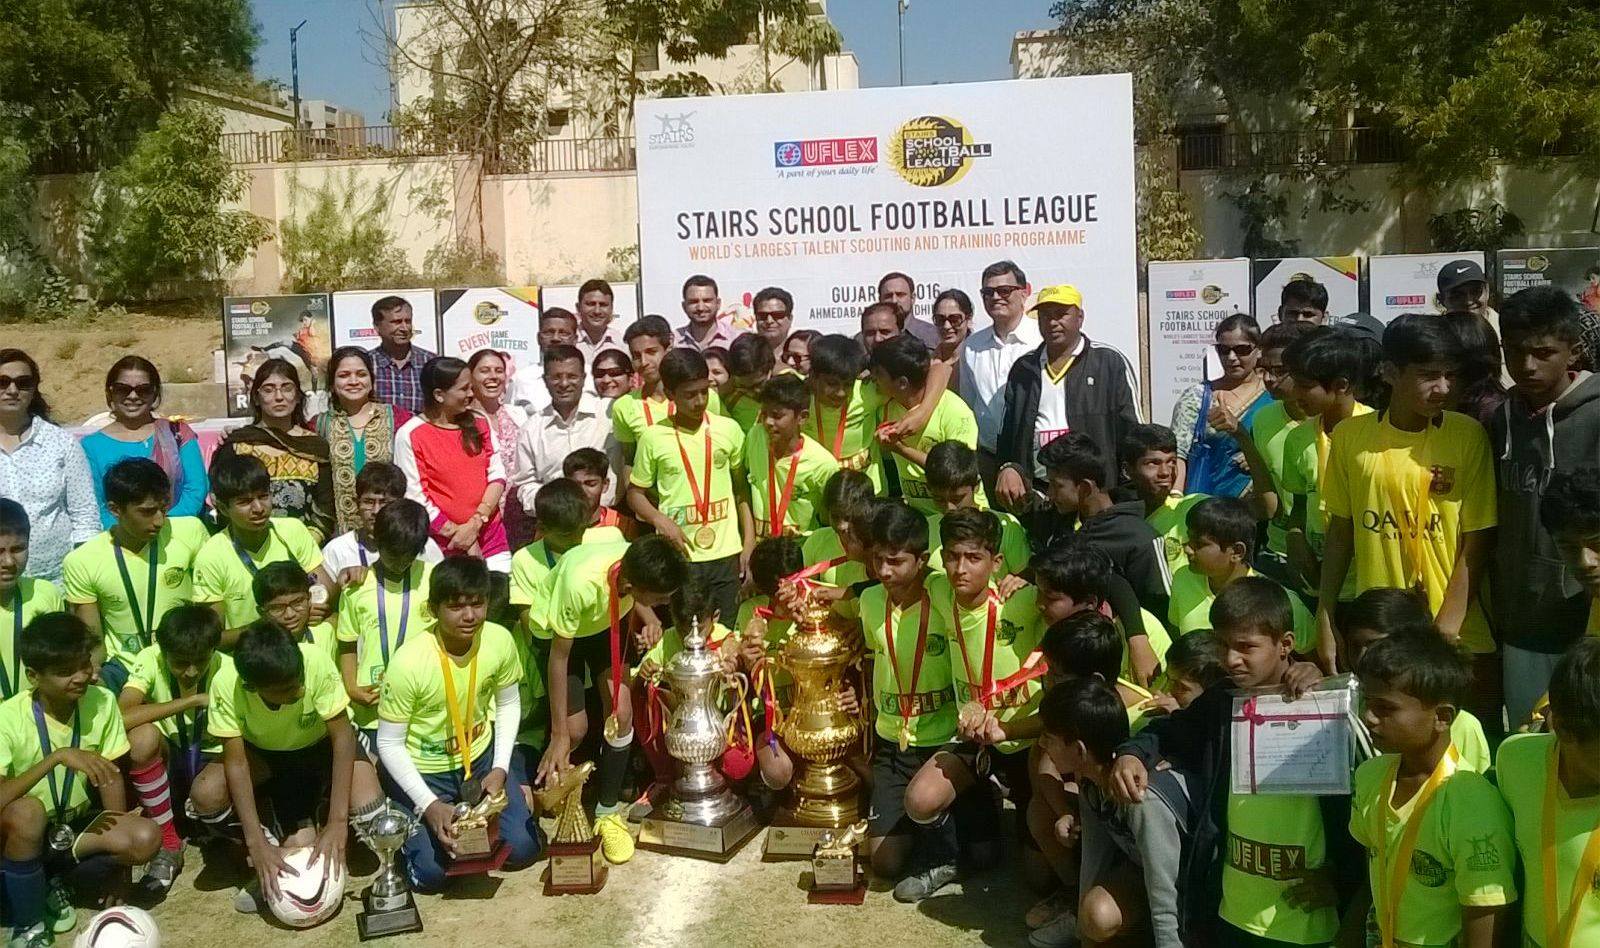 First Phase Of Stairs School Football League, Gujarat (North Zone) Concludes